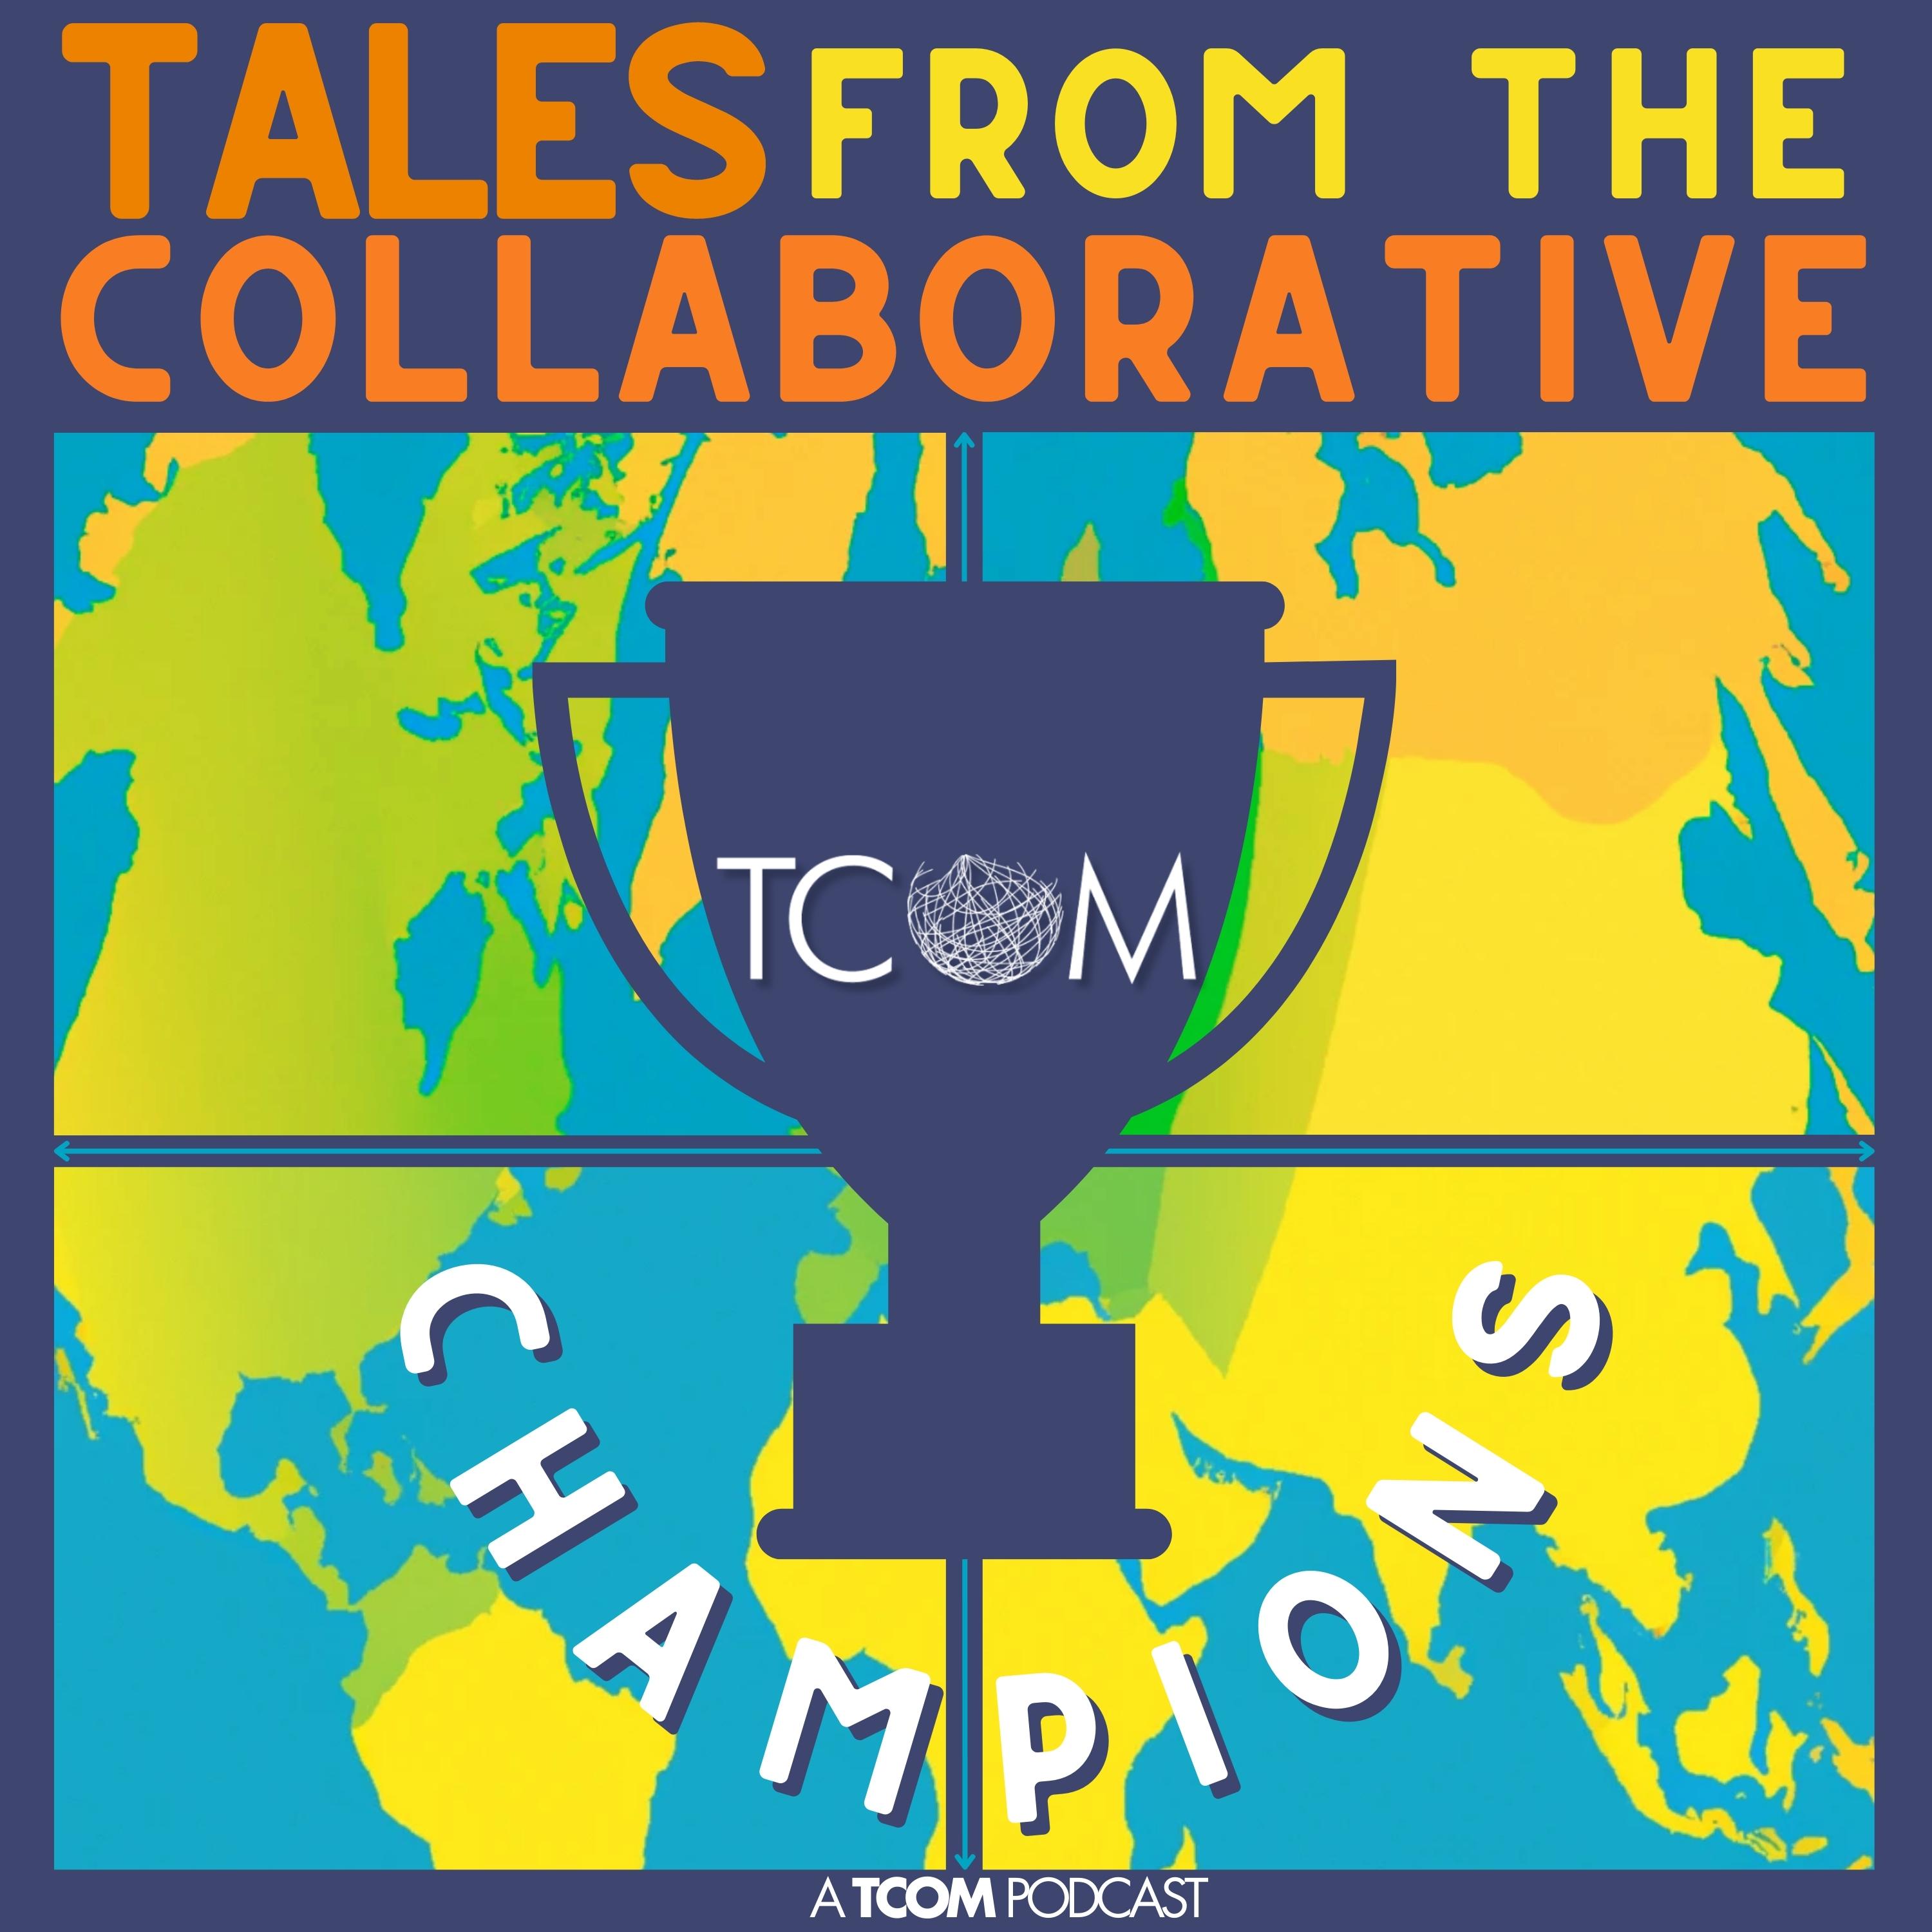 Artwork for podcast Tales From the Collaborative